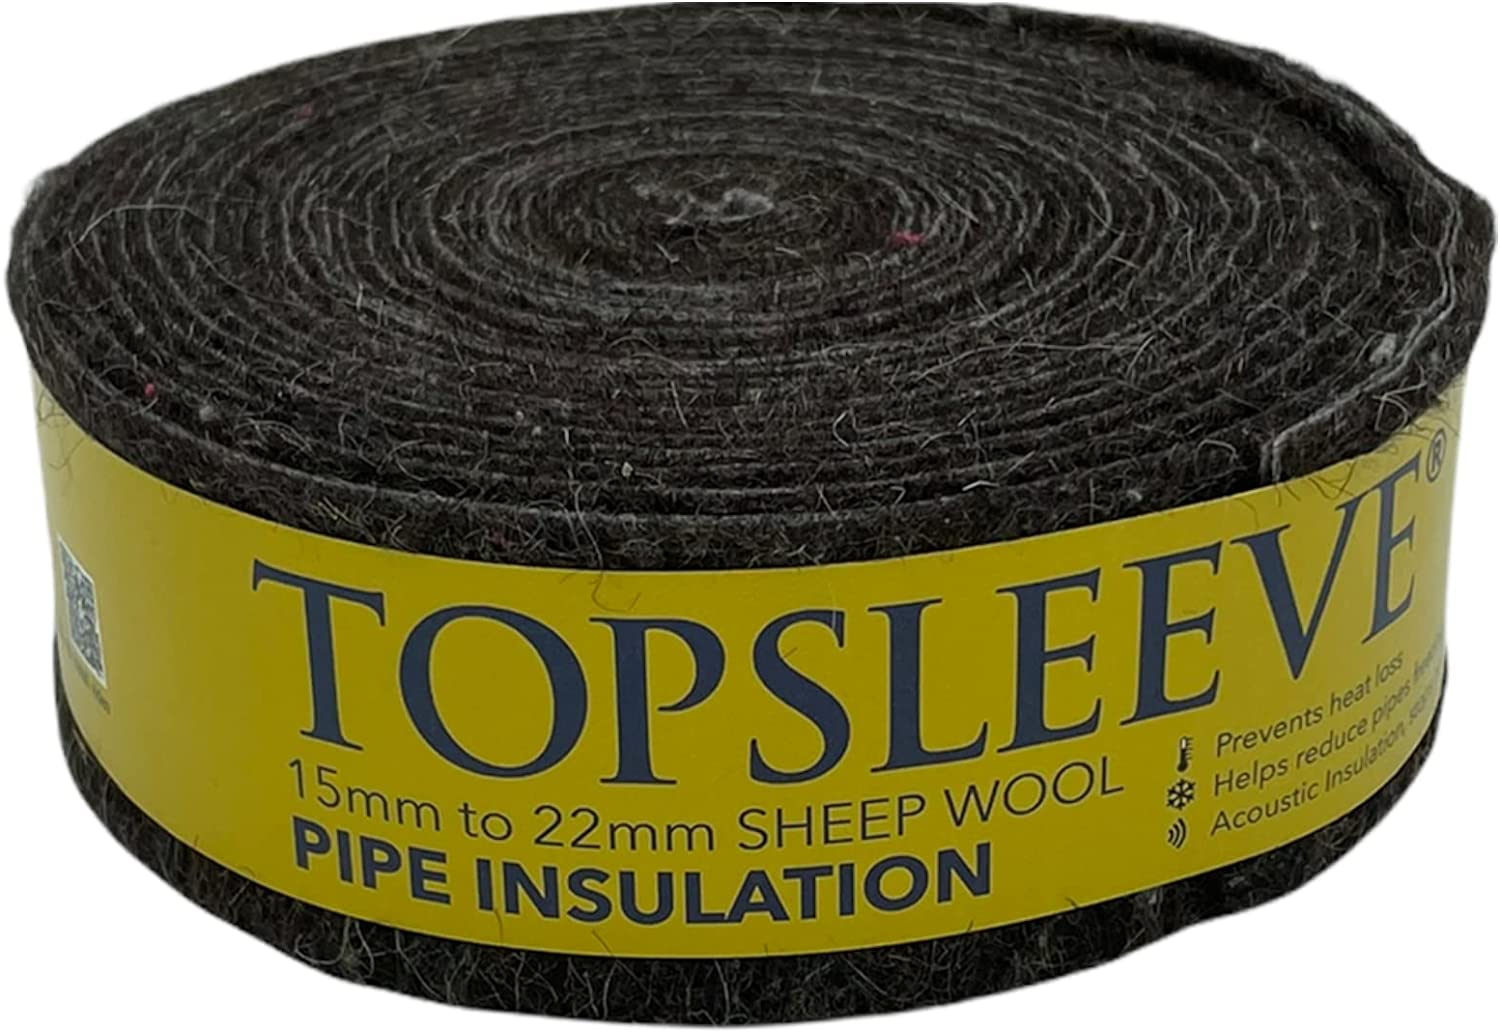 Topsleeve Pipe insulation Lagging for 15mm and 22mm pipes, 50mm x 7.2m Roll